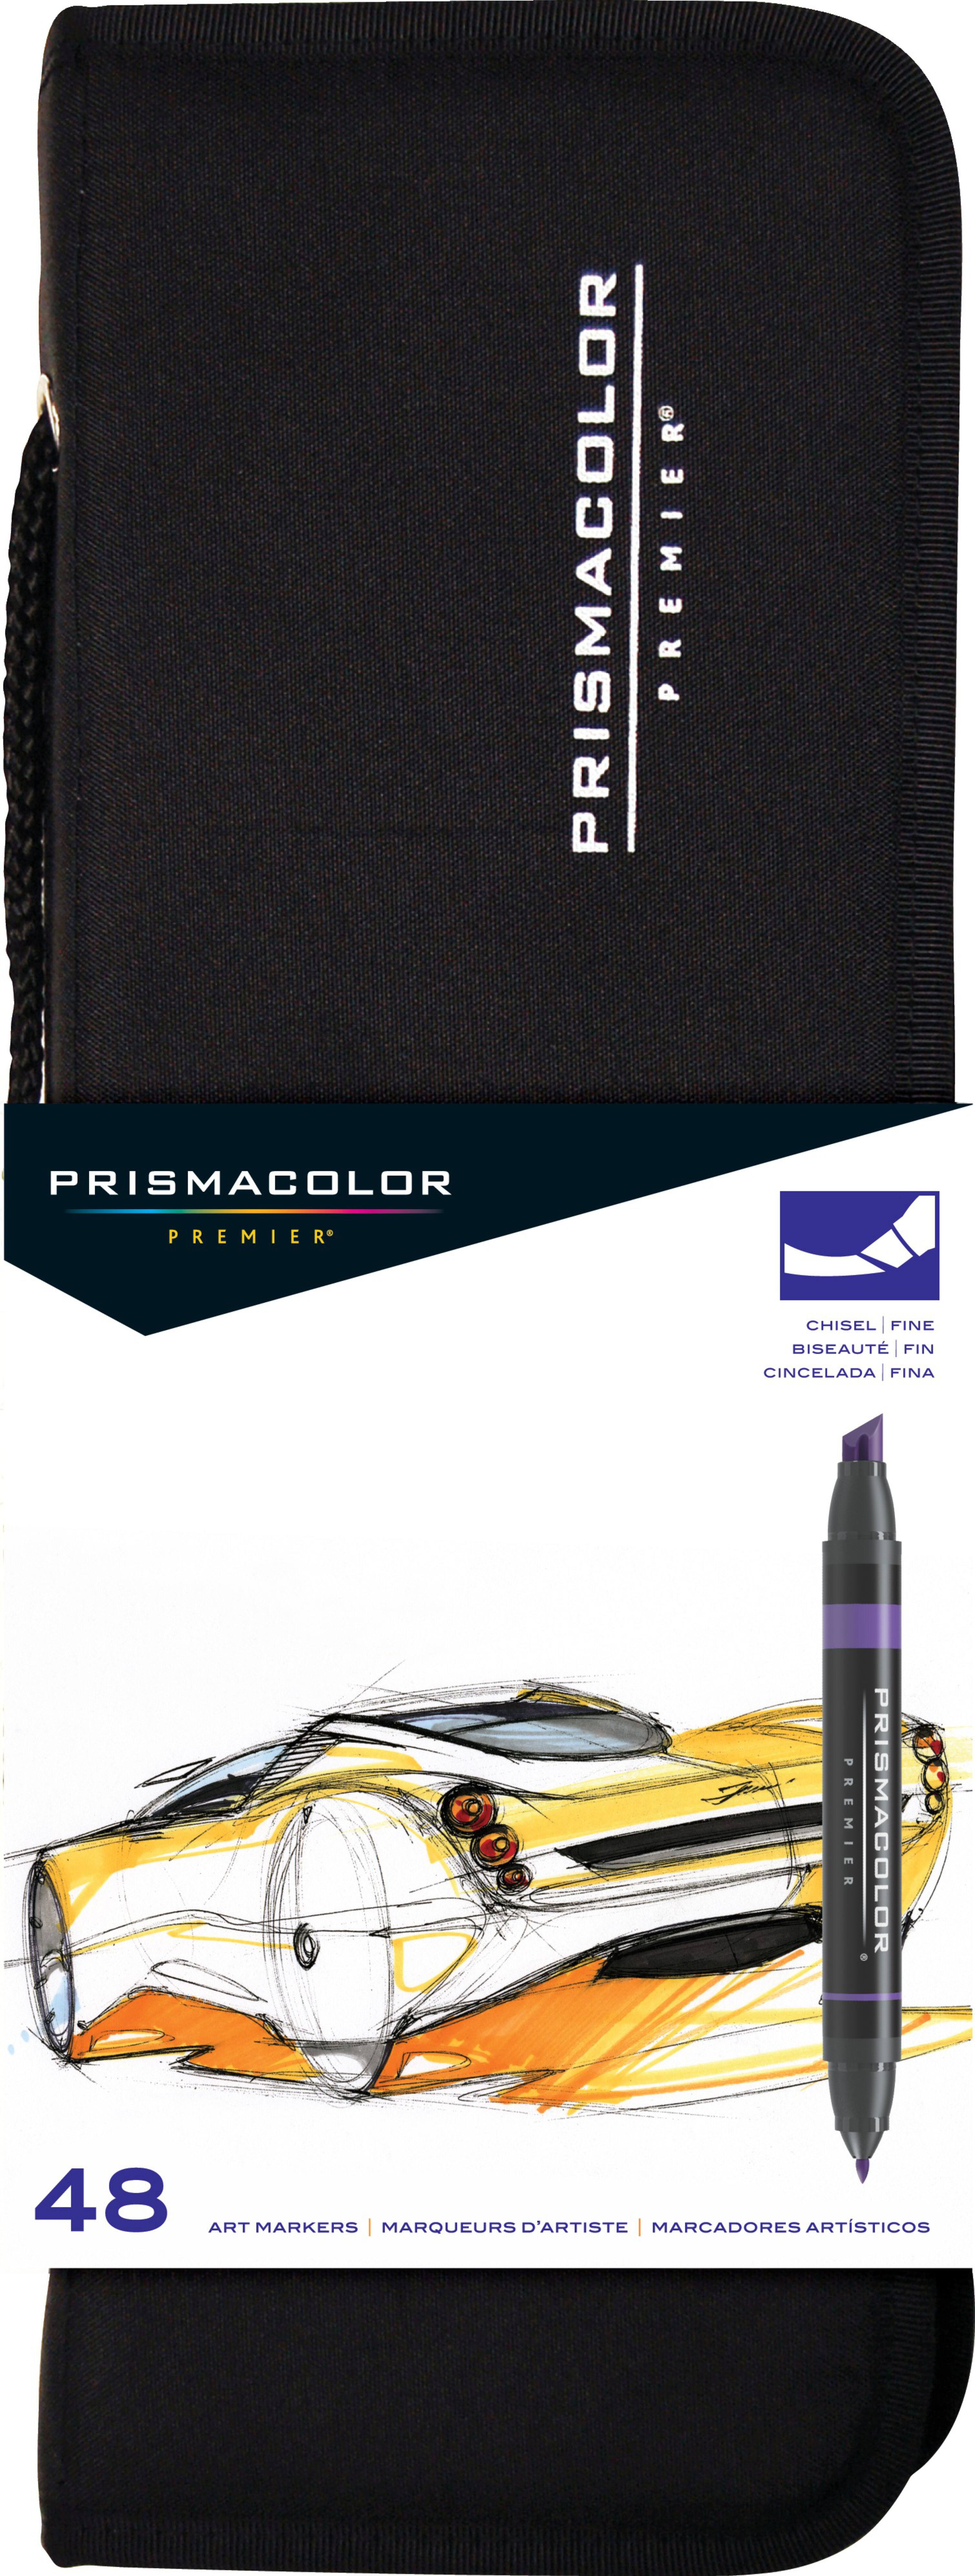 Fine and Chisel Tip 12-Count Prismacolor Premier Double-Ended Art Markers 